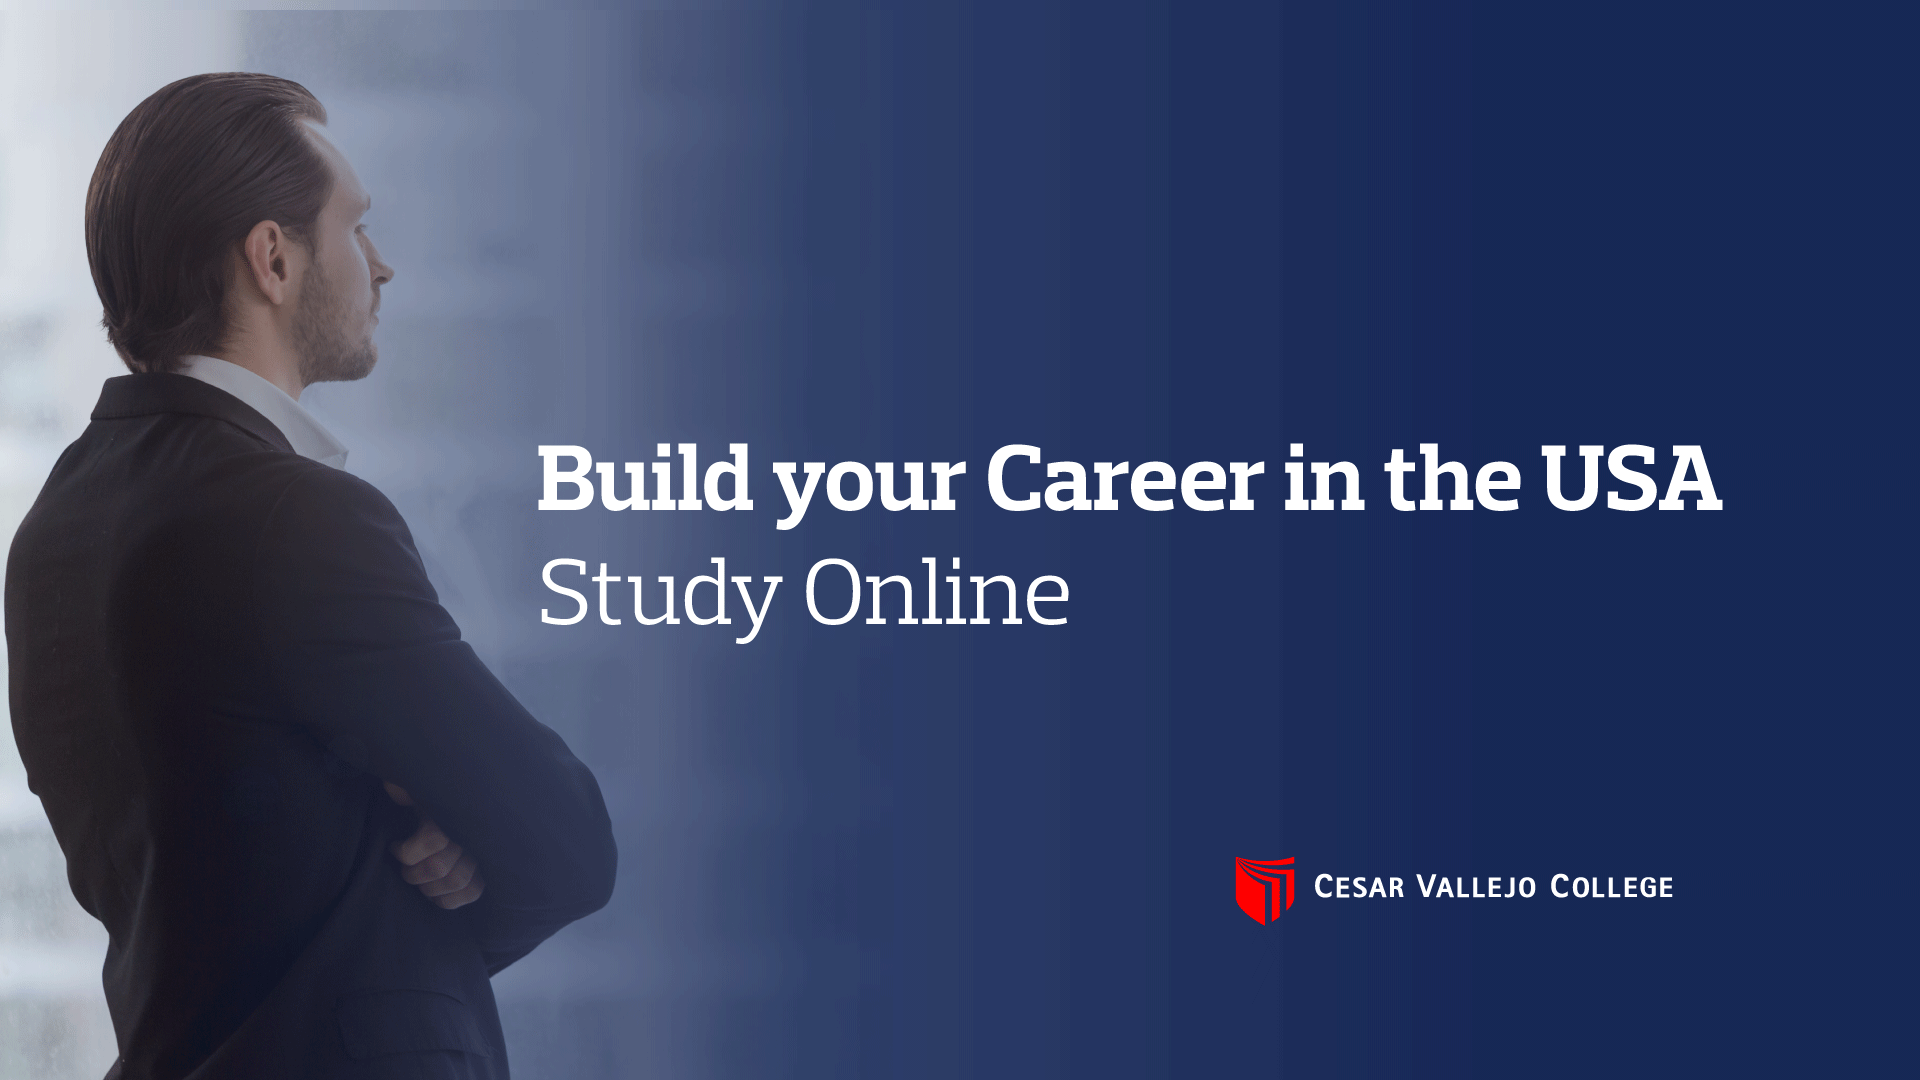 Build Your Career in the USA - Study Online